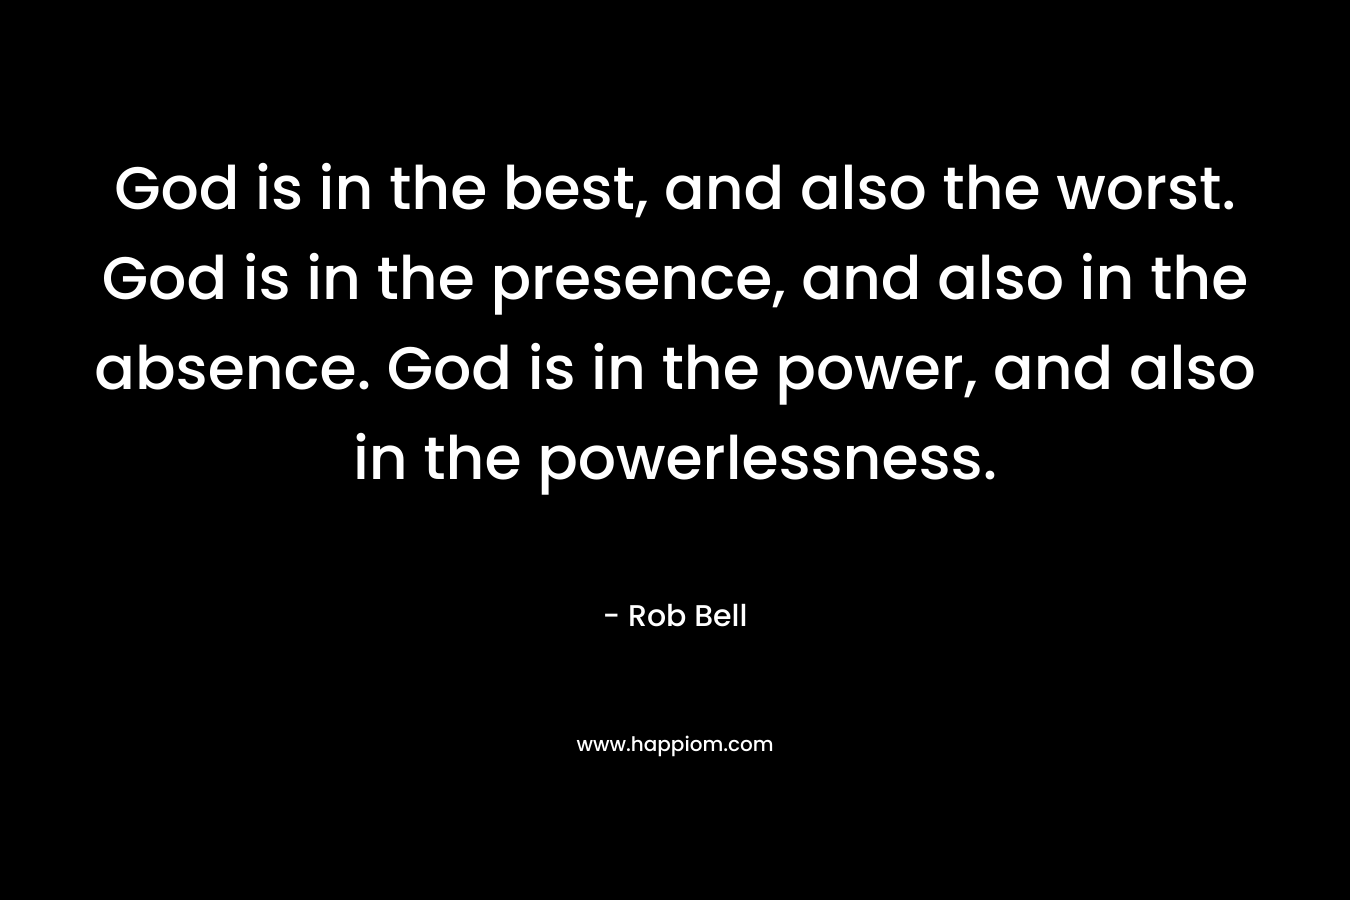 God is in the best, and also the worst. God is in the presence, and also in the absence. God is in the power, and also in the powerlessness.